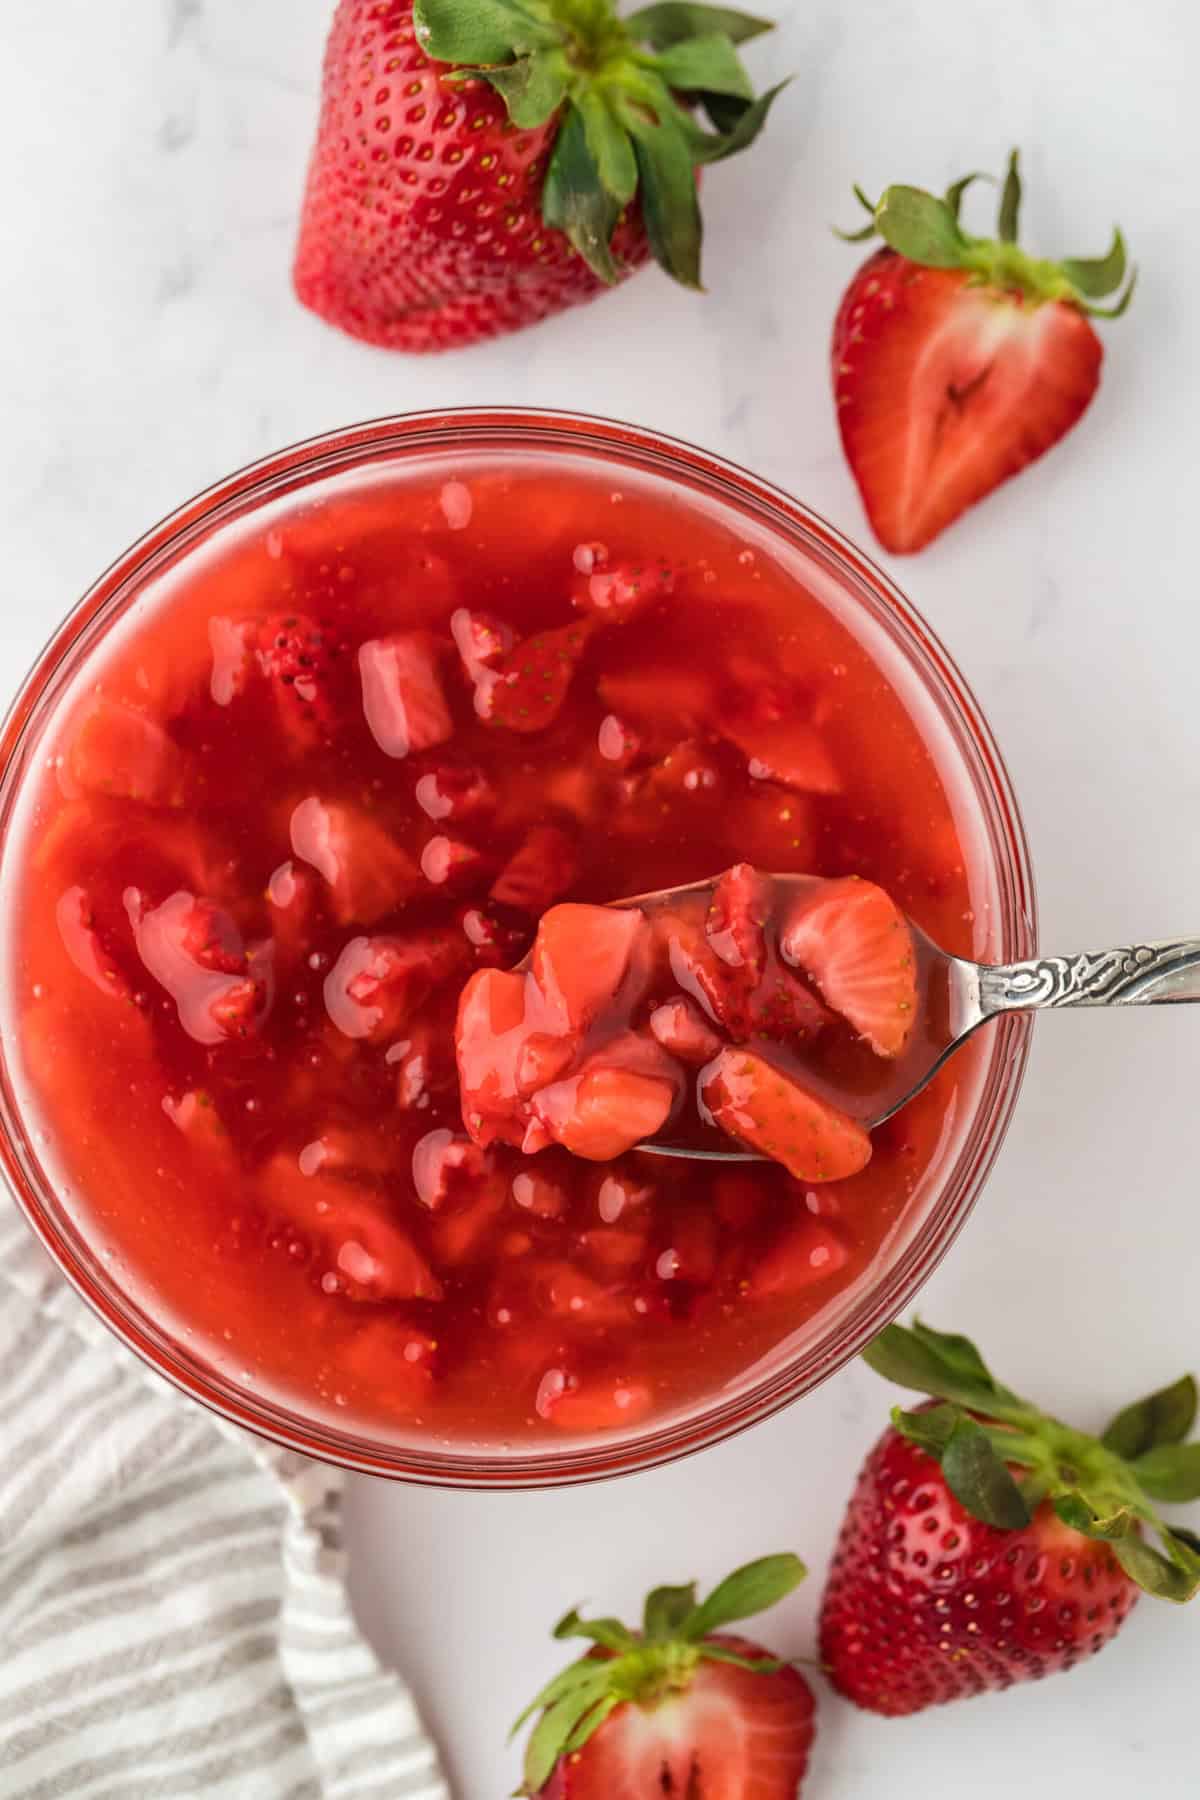 Overhead shot of a bowl of freshly made strawberry sauce with a spoon on it. Surrounding the bowl are several strawberries